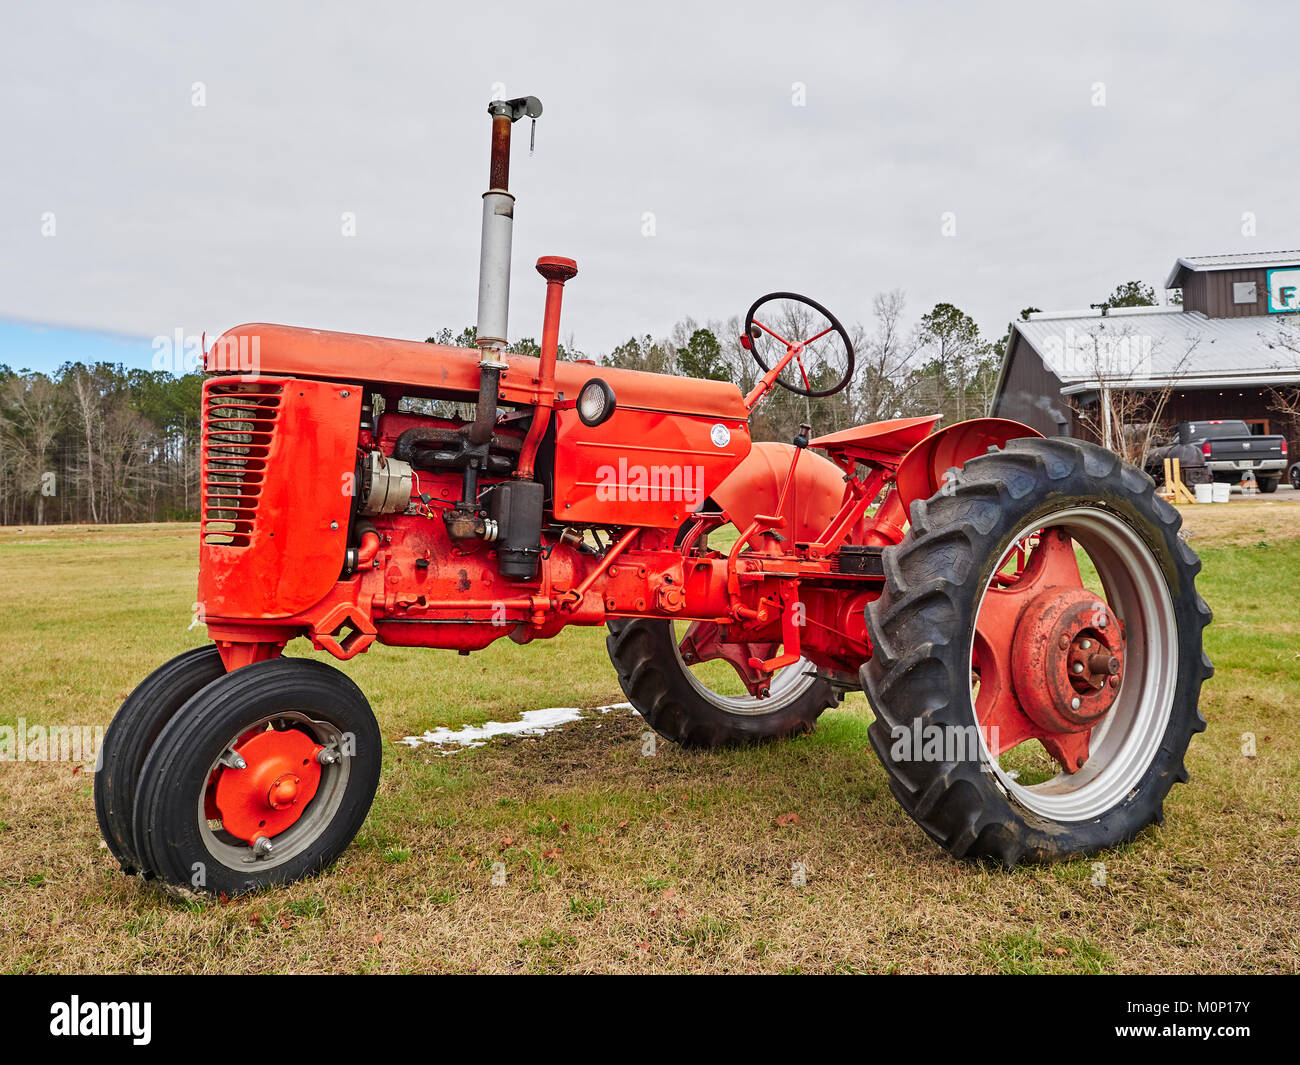 Old  red vintage antique Case farm tractor on display at Farm Market in rural Pike Road Alabama, United States. Stock Photo